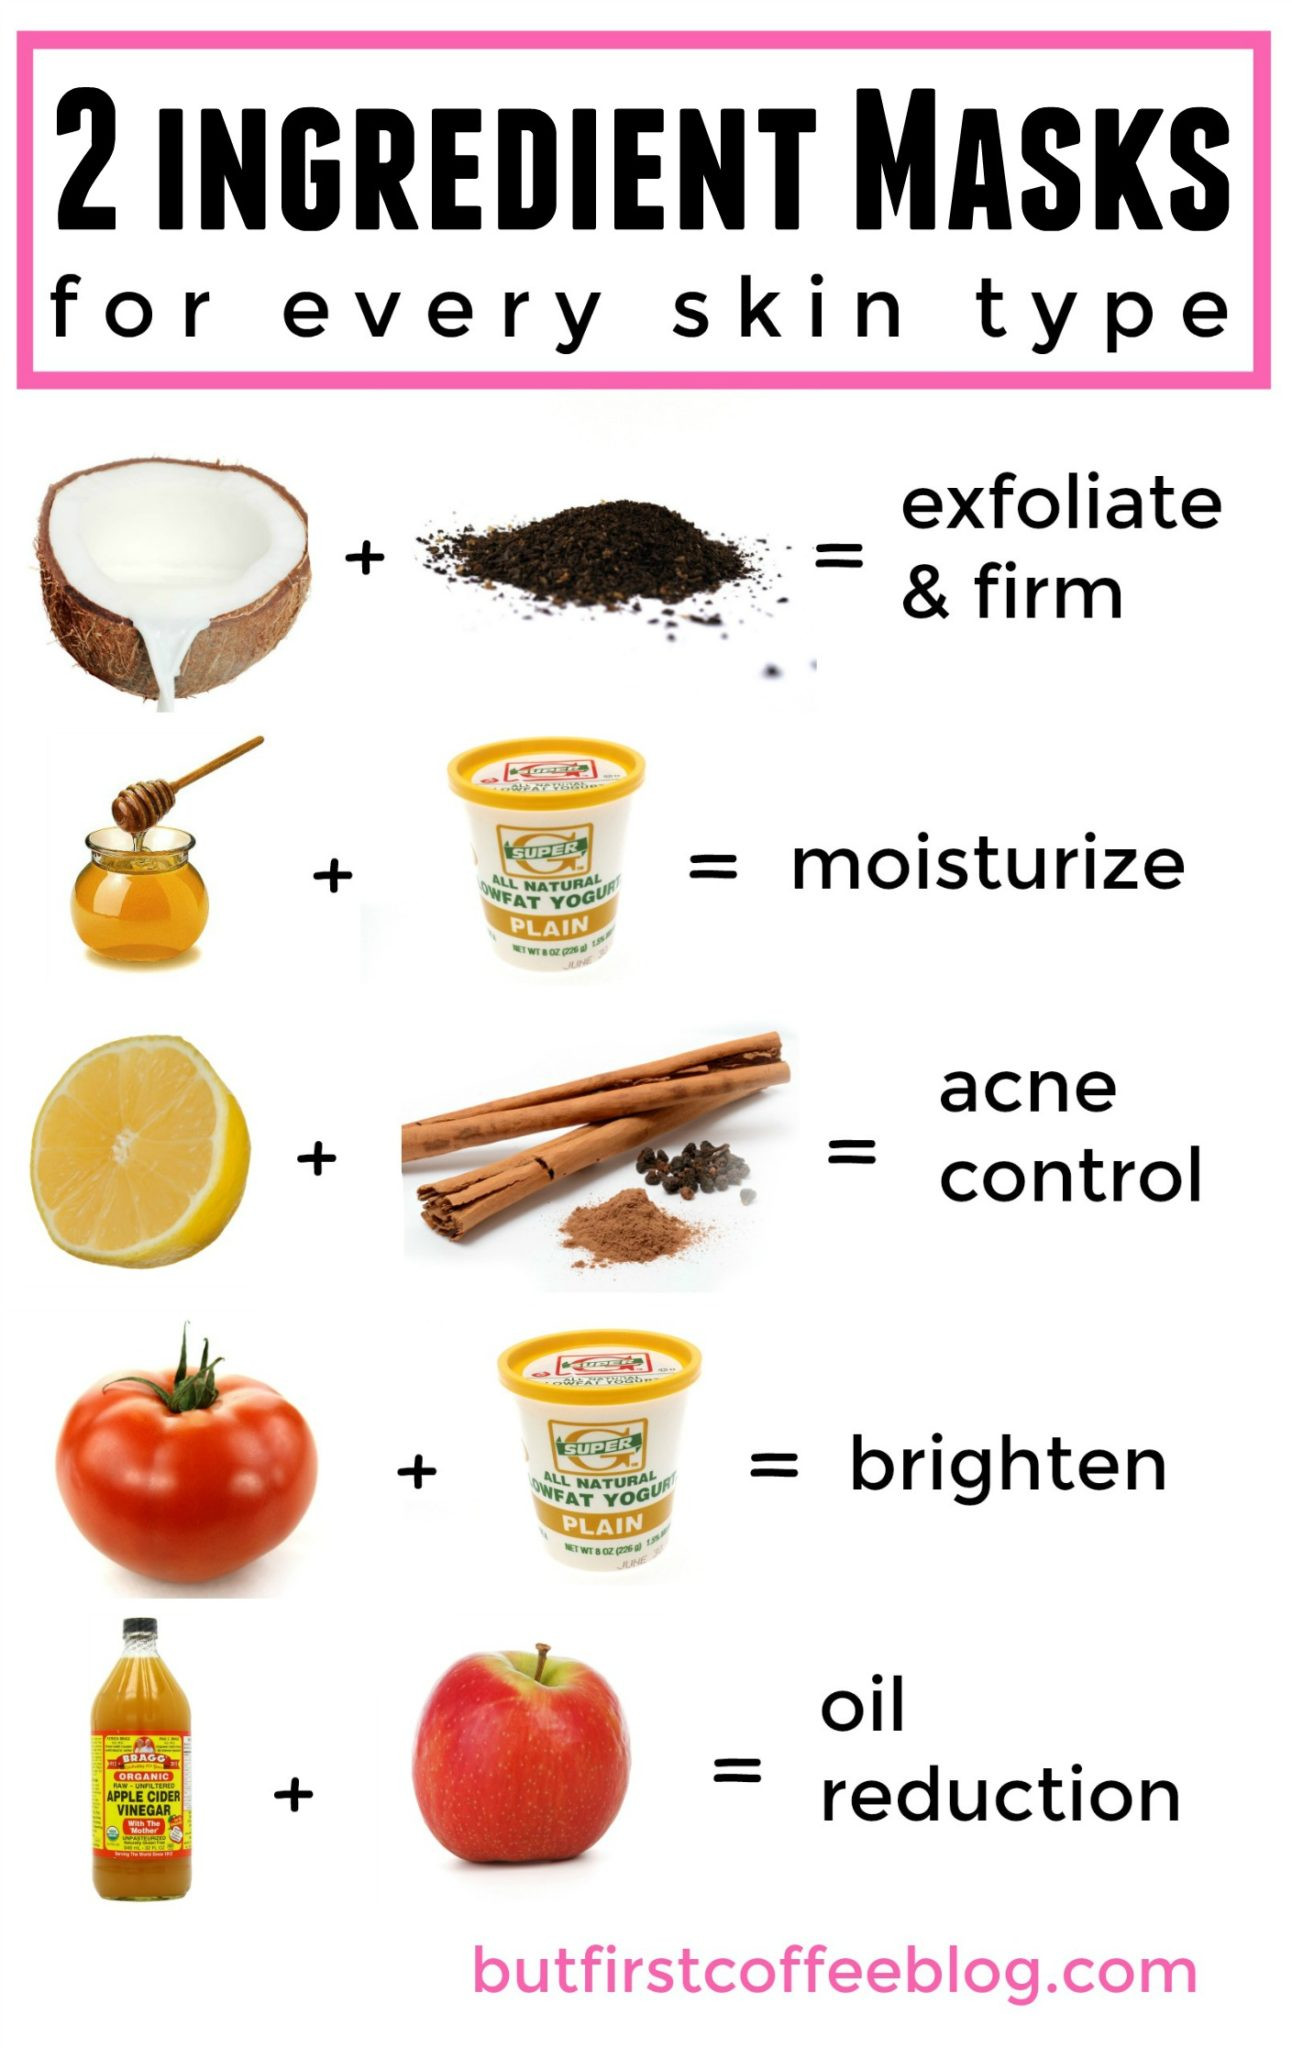 DIY Facial Mask Recipes
 2 Ingre nt D I Y Face Masks for Every Skin Type